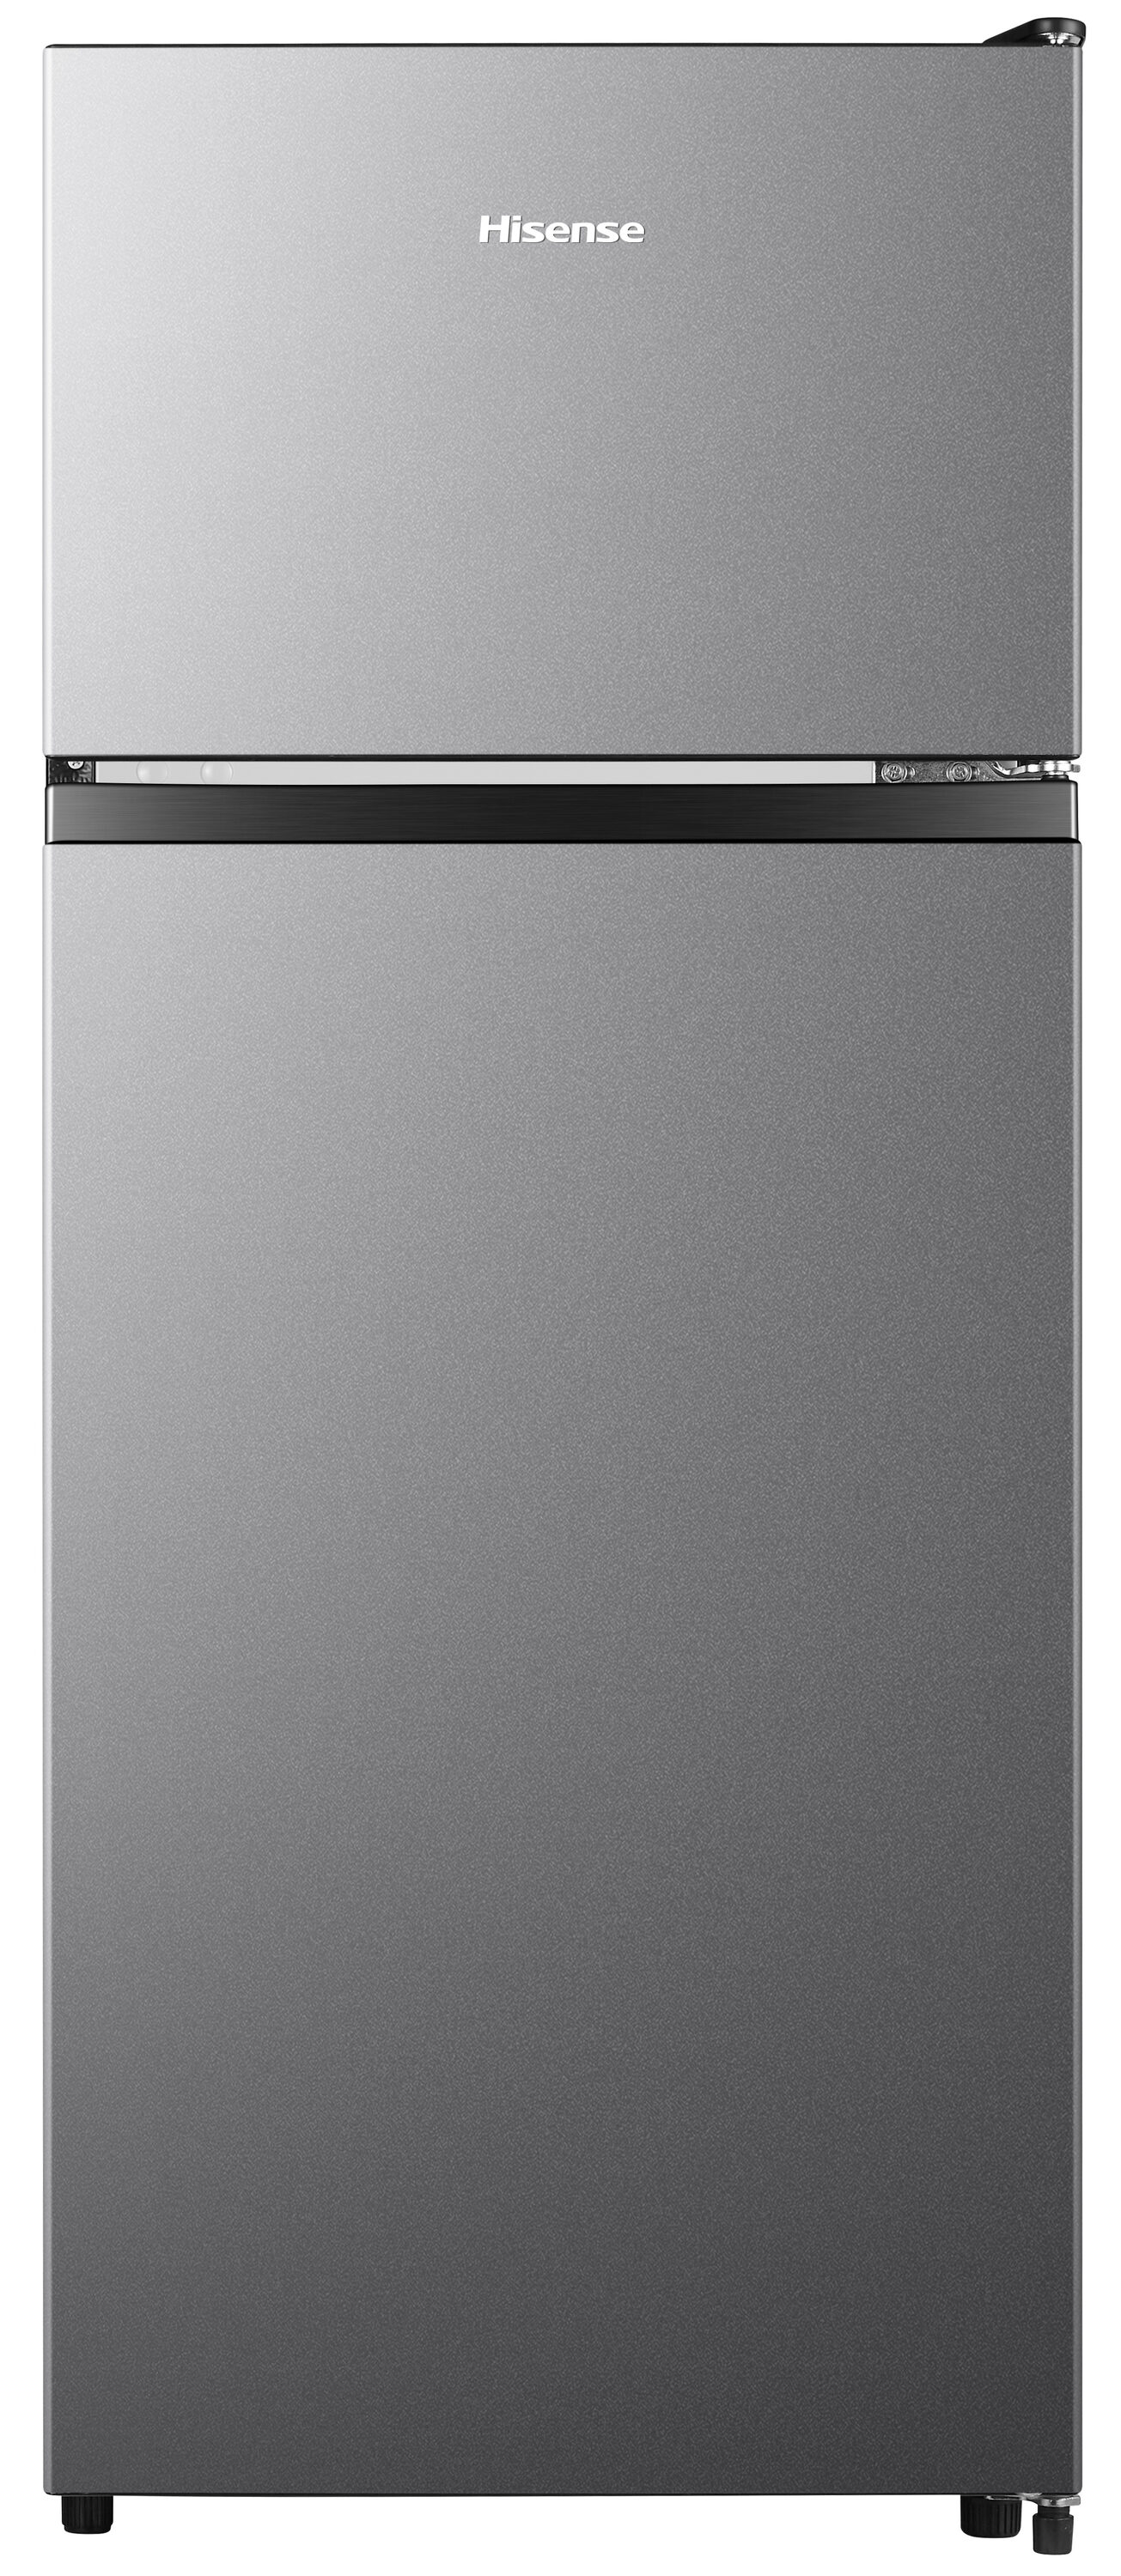 Twin College Move Ins - and a NewAir Compact Refrigerator Review 